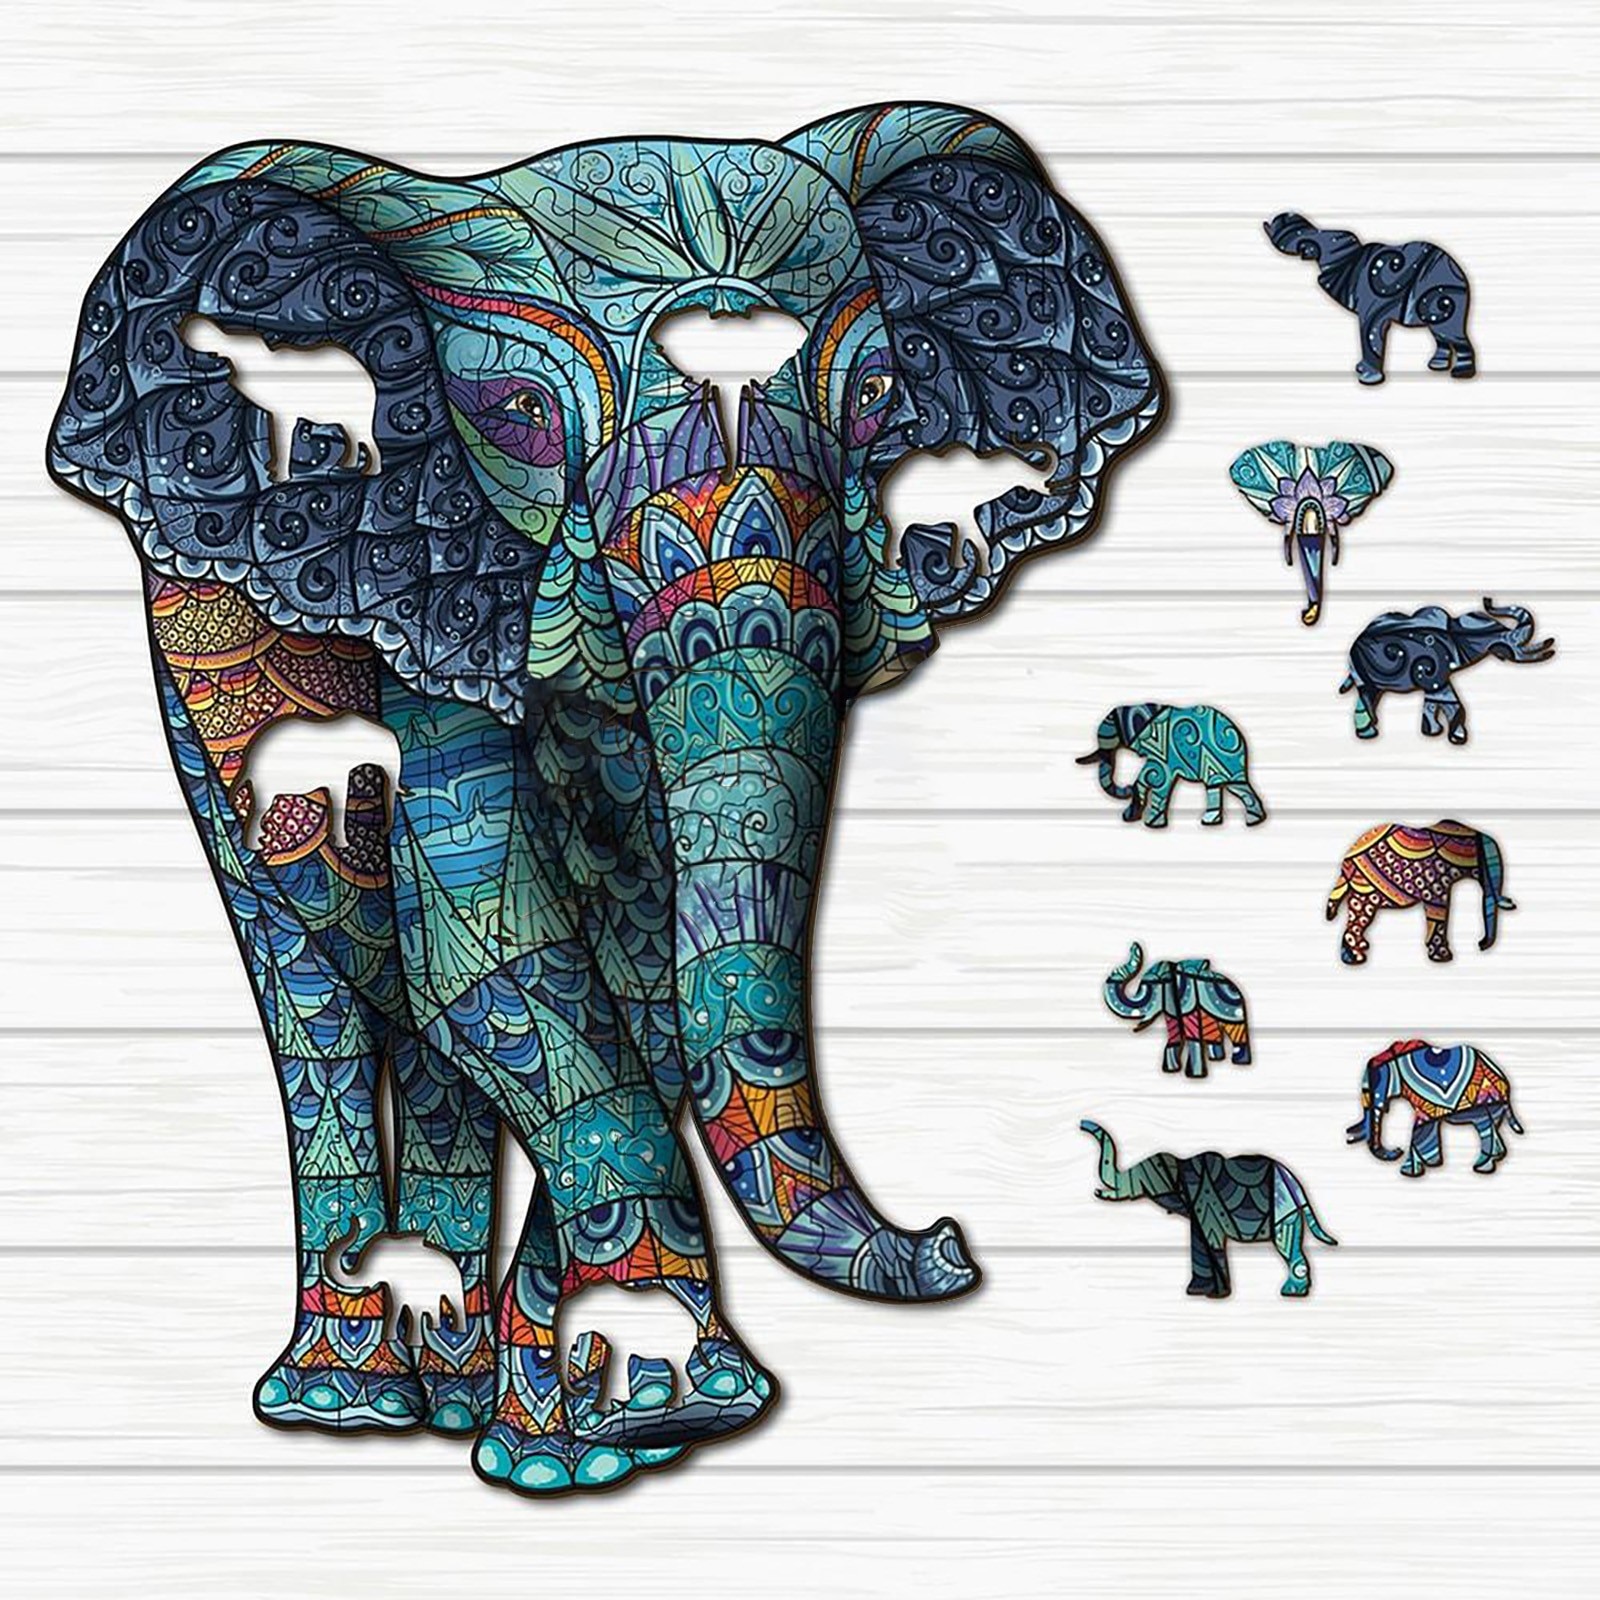 3000 Pieces of Wooden Puzzle-Strong Elephant-Jigsaw Puzzles Home Decoration Educational Games Toy Gift